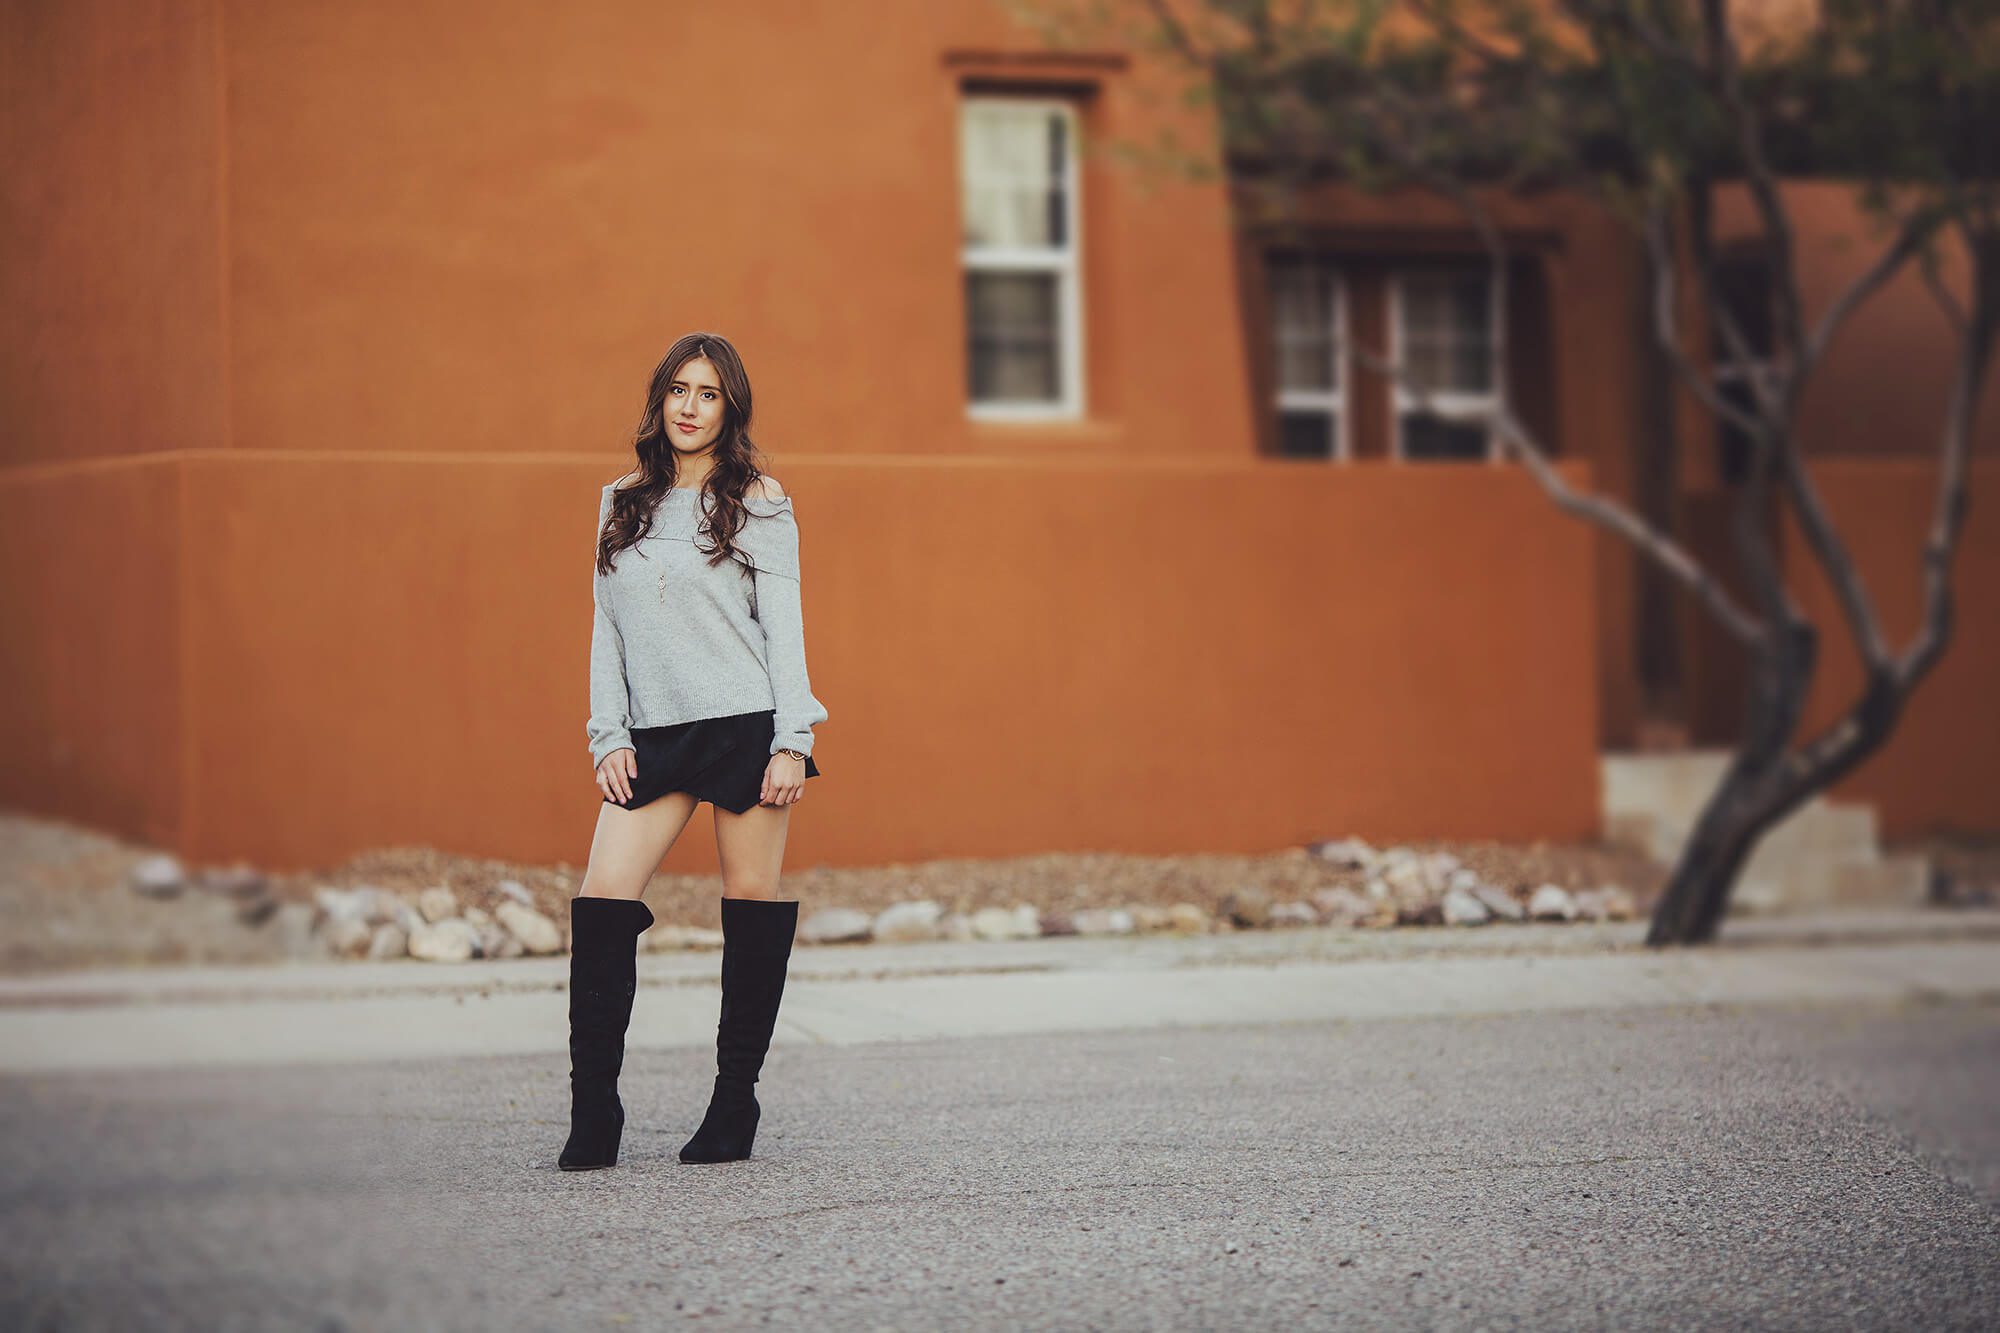 Brianna, a Cienega High School senior, stands tall in beautiful contrast to the Southwest-style of her Tucson home during her senior photoshoot